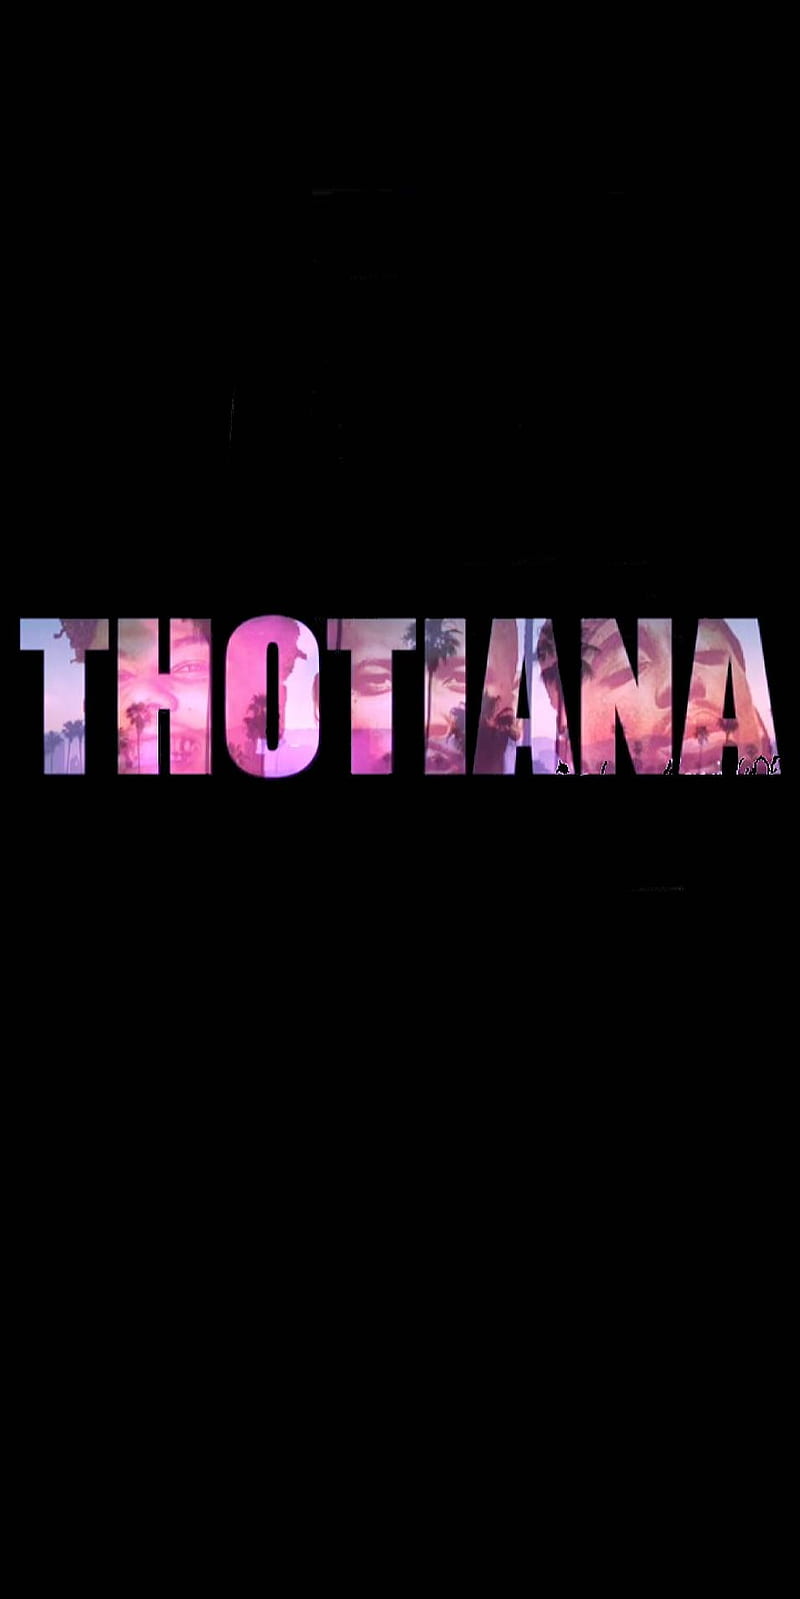 Thotiana, for blue face fans, for cardi b fans, HD phone wallpaper